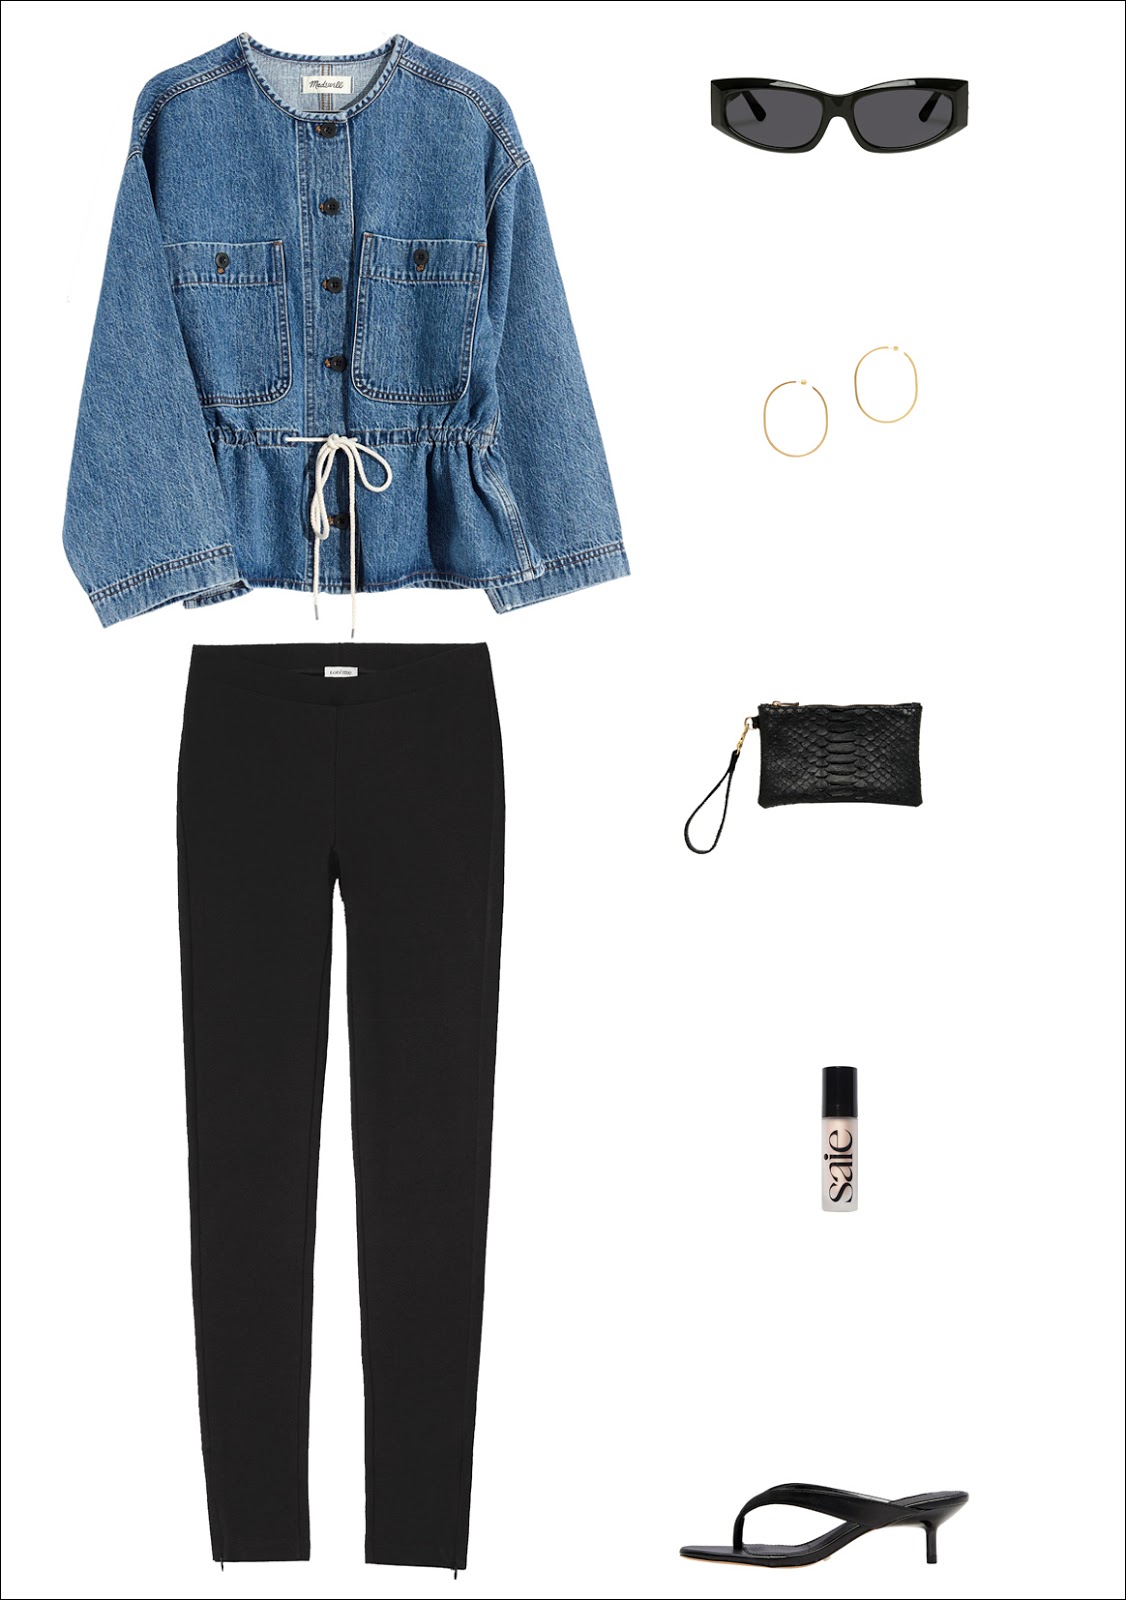 Start Fall Off In Style With This Effortless Outfit Idea